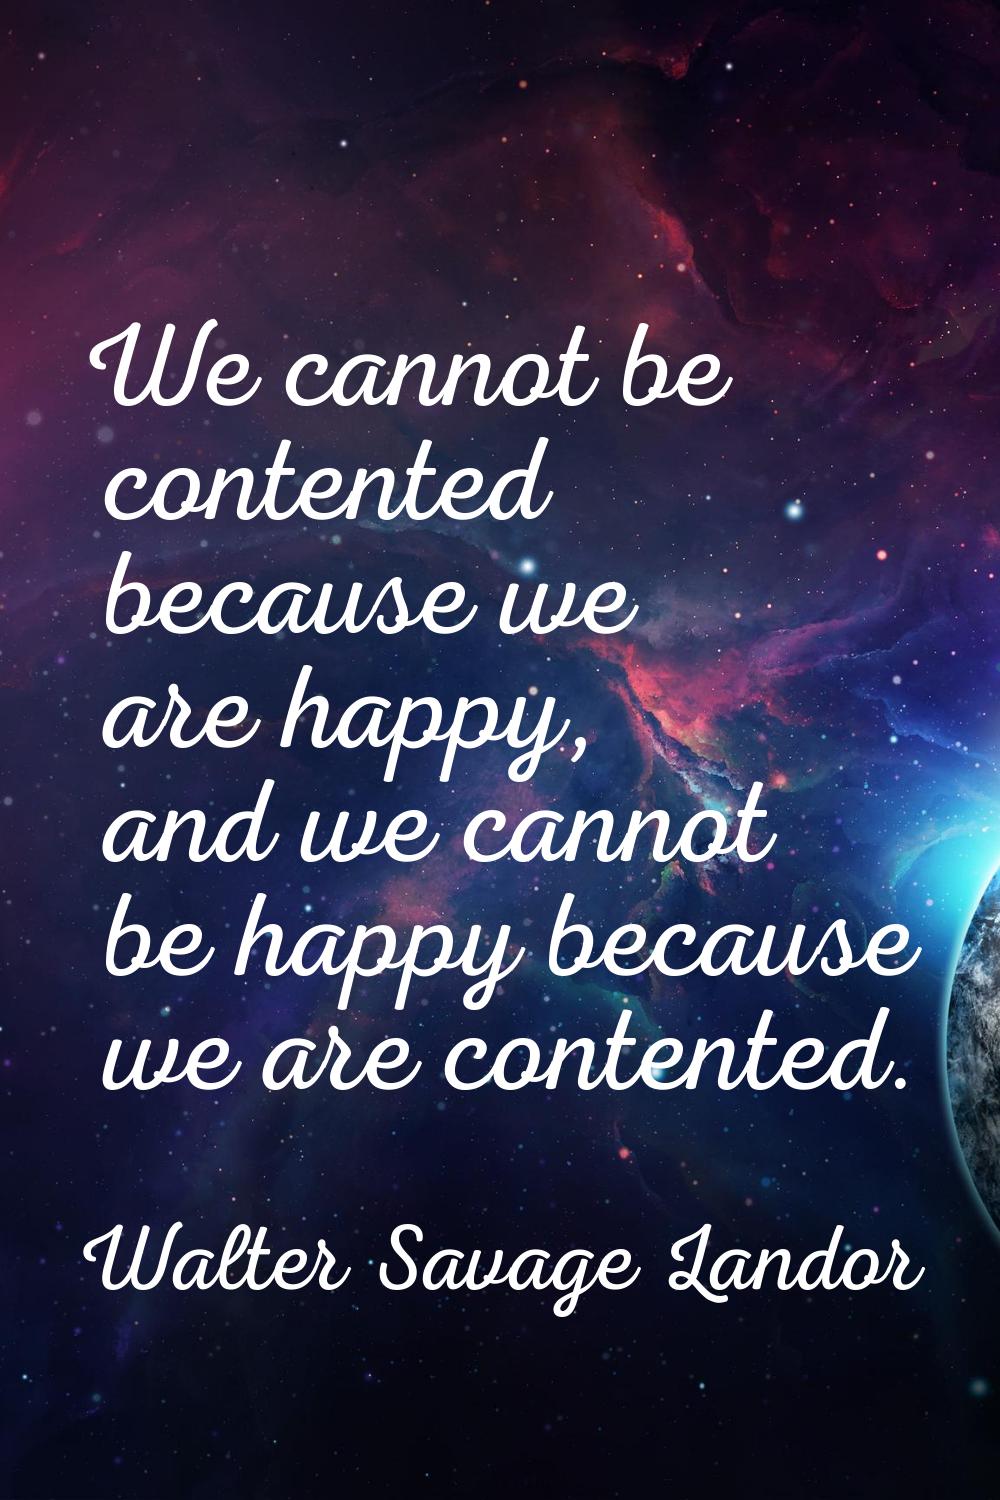 We cannot be contented because we are happy, and we cannot be happy because we are contented.